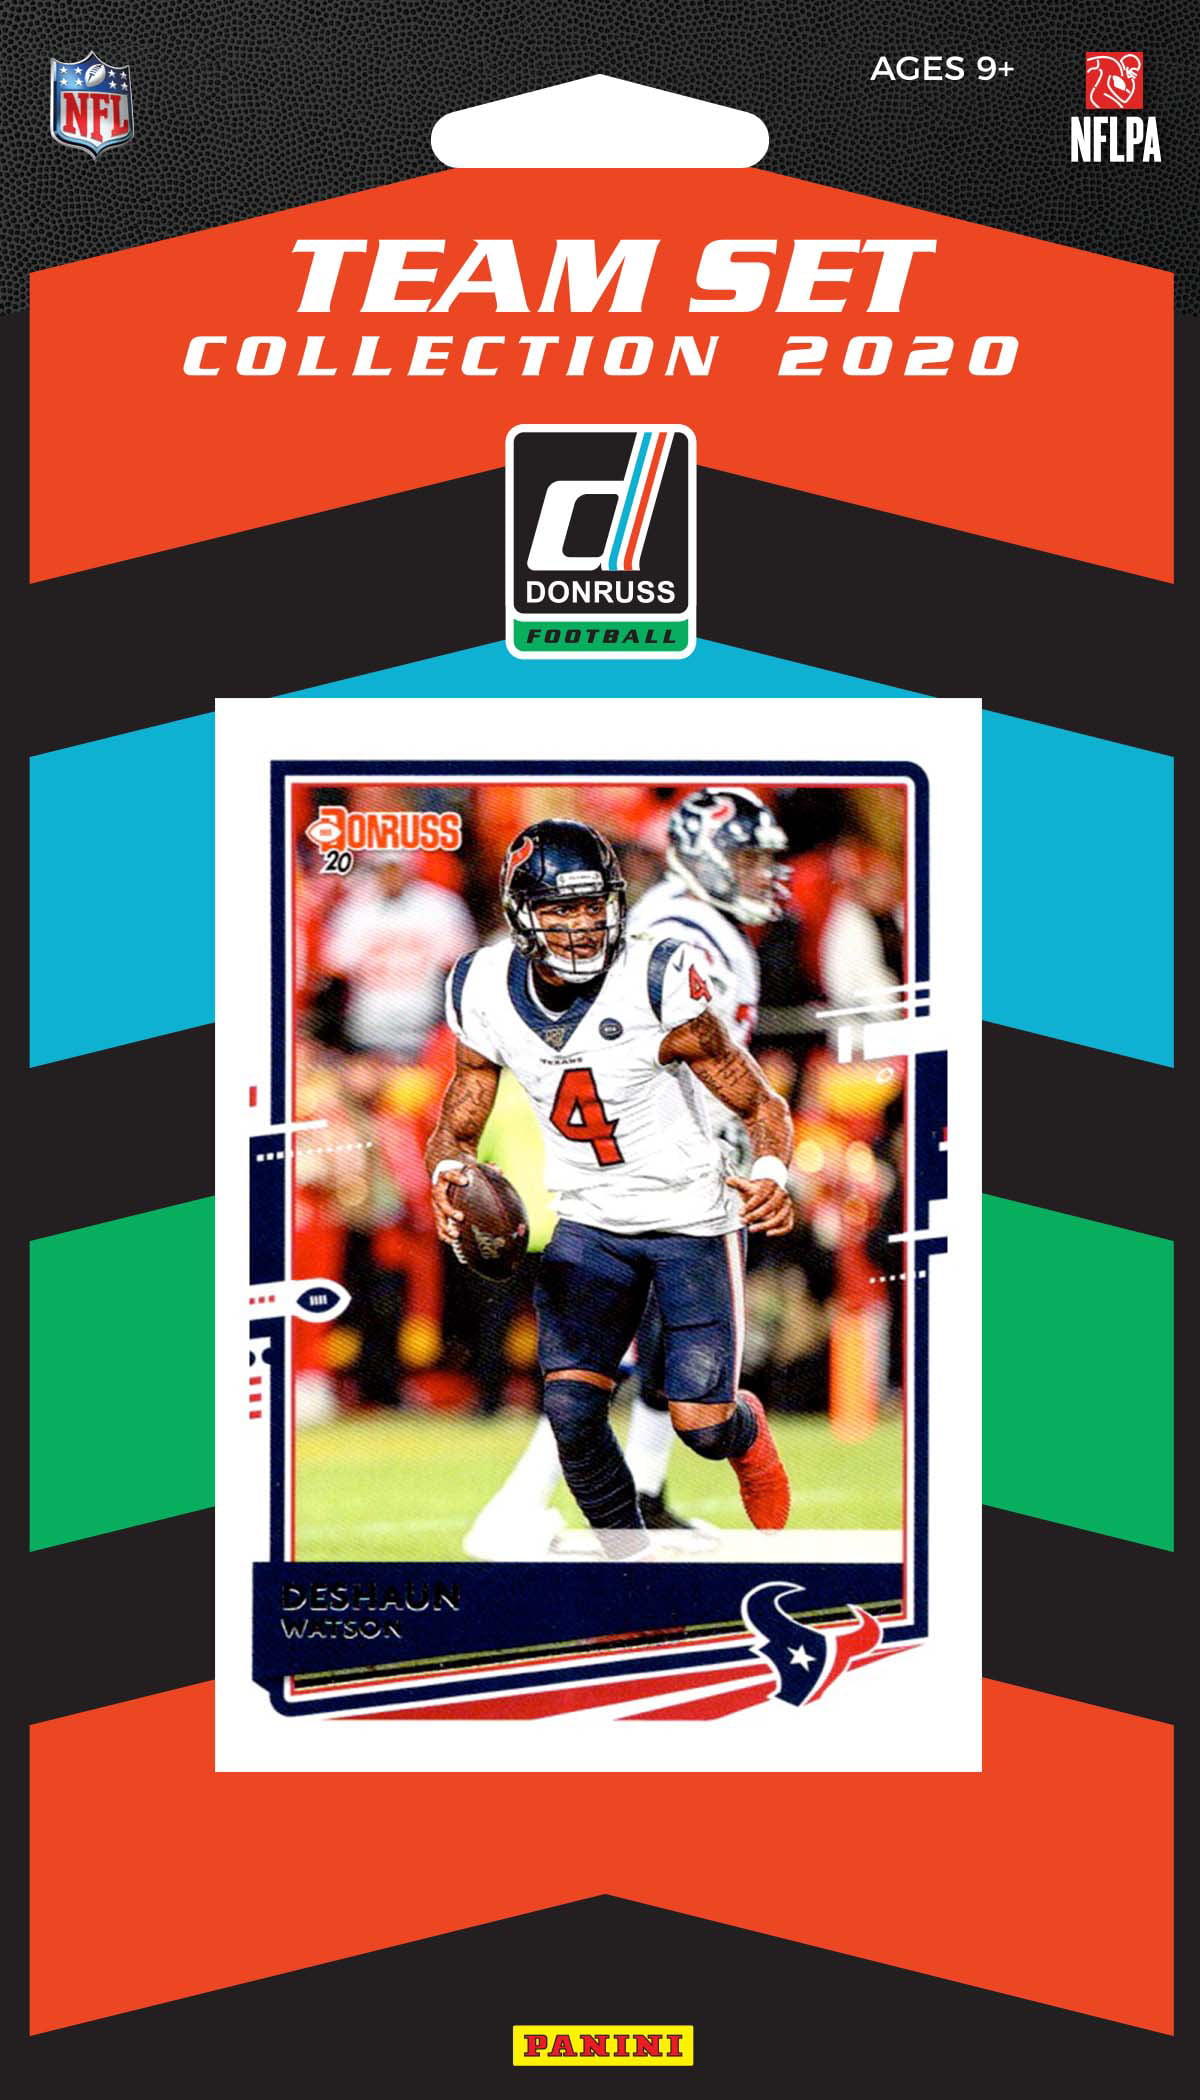 Houston Texans 2020 Donruss Factory Sealed 8 Card Team Set with Deshaun Watson and JJ Watt Plus 2 Rookie Cards and 4 Other Players